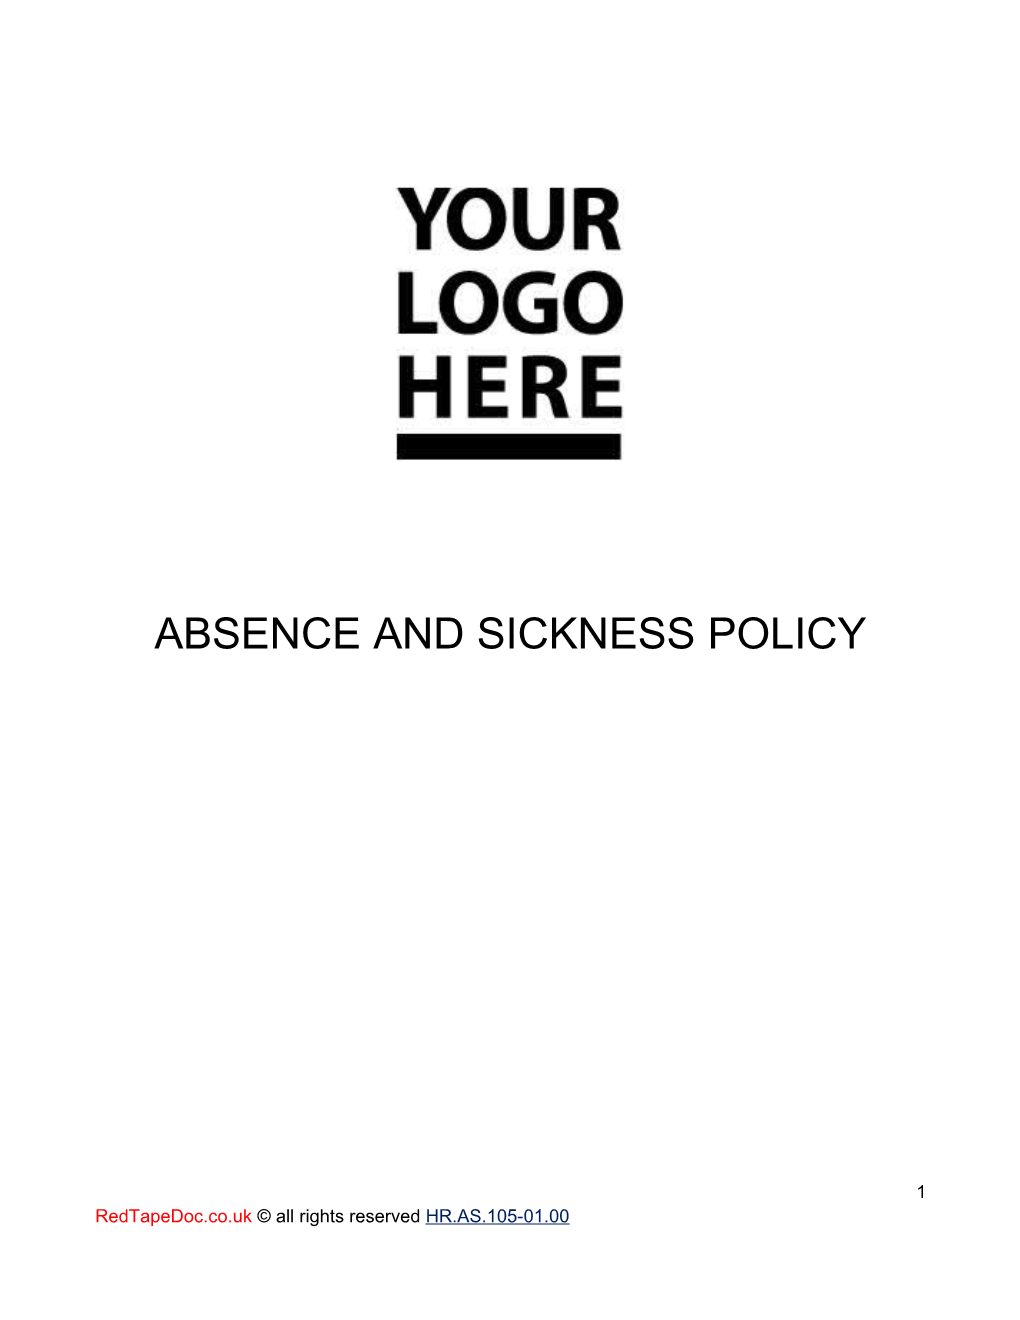 Absence and Sickness Policy